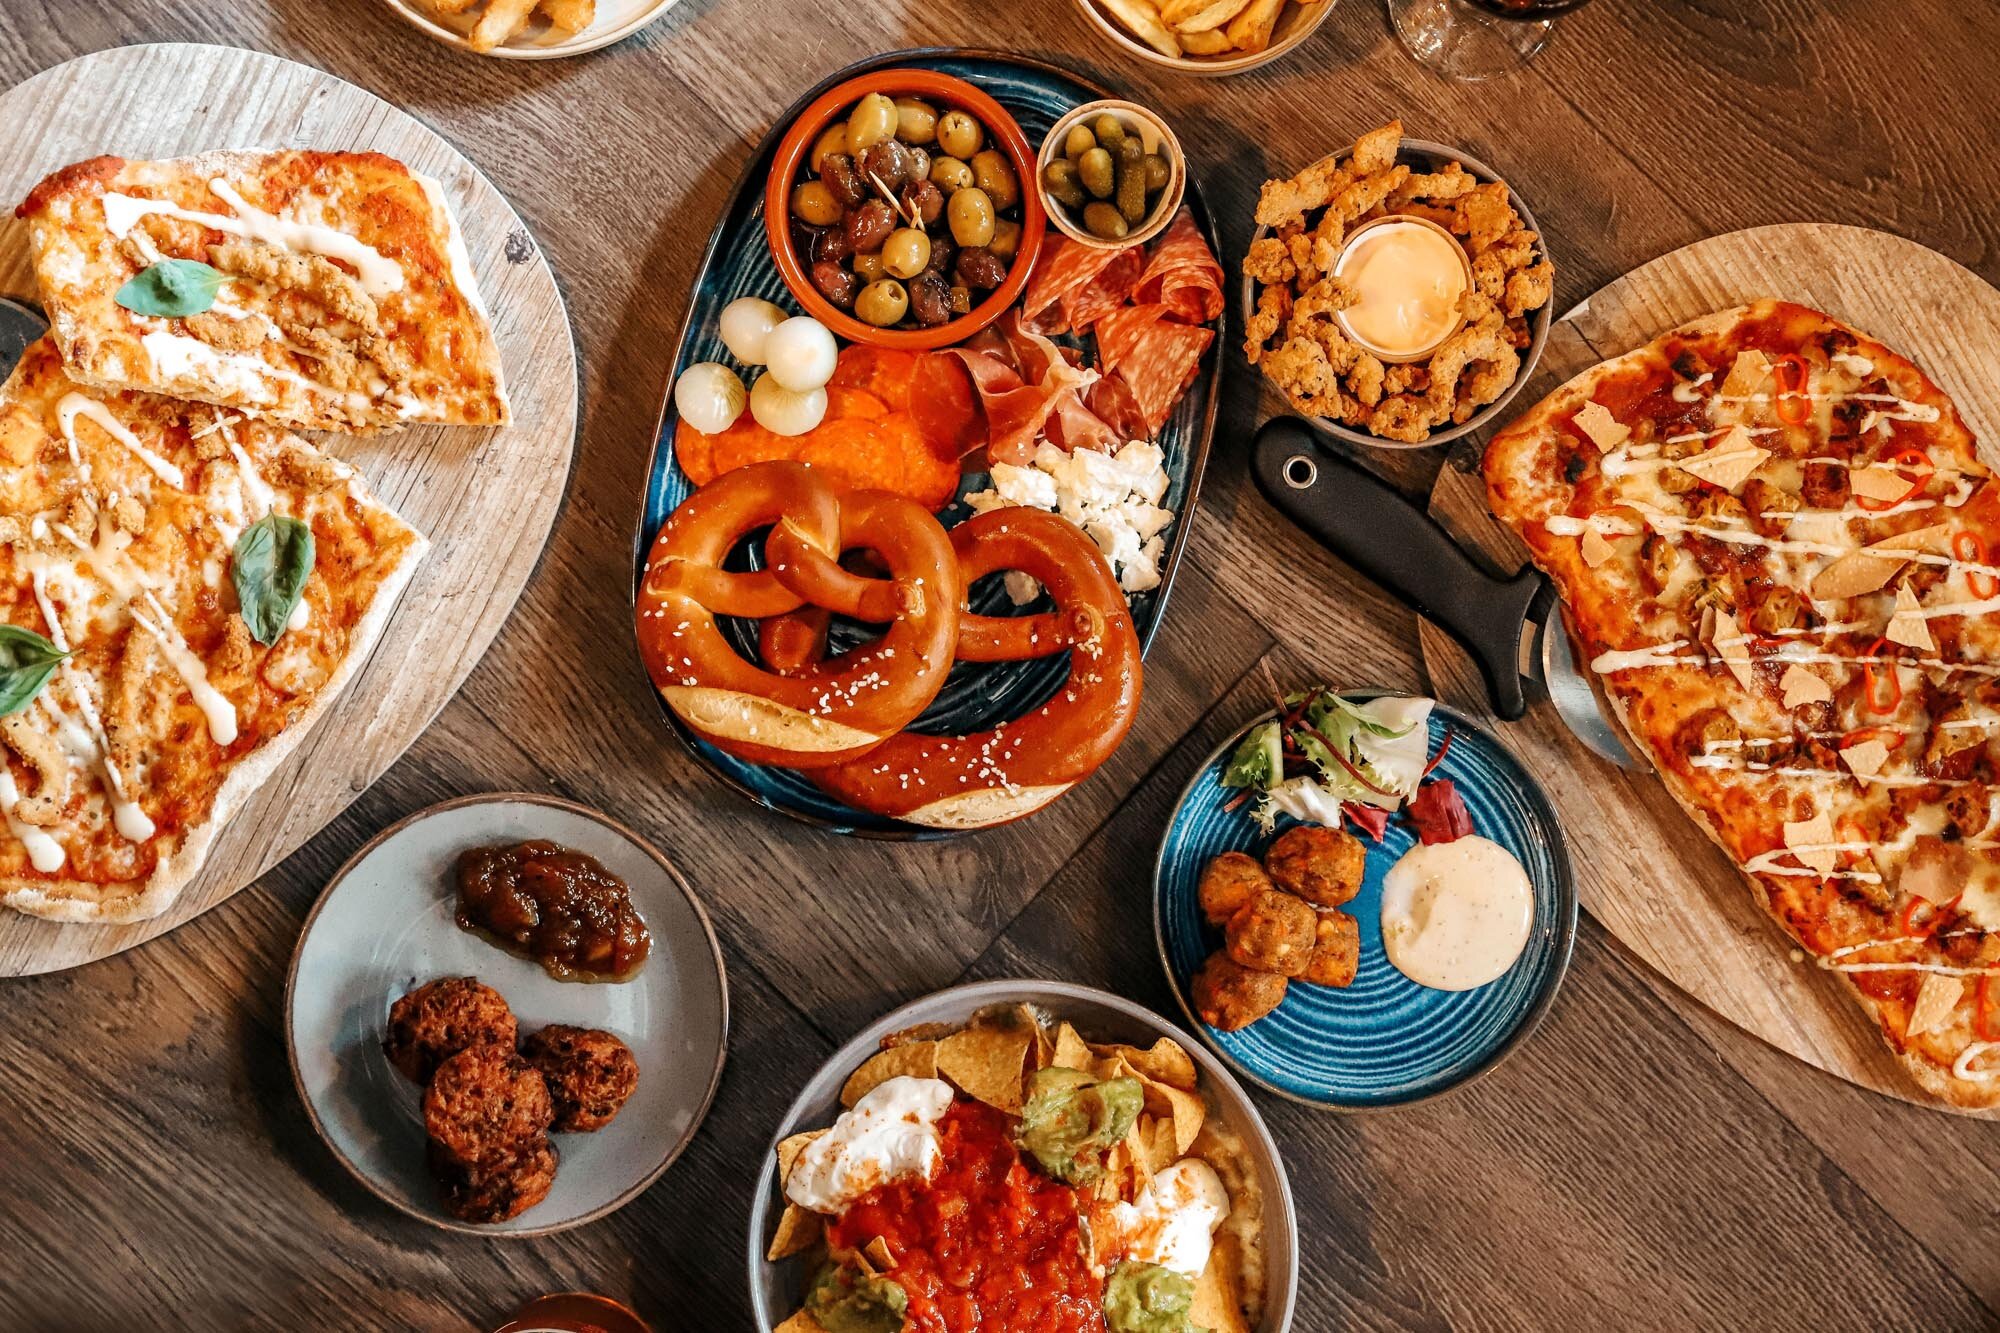 Our food menu has something for everyone 😊
Whether it be a Garlic Chicken Pizza, Hot &amp; Spicy Nachos or a selection of our finest beer bites!
Small plates at 3-4-&pound;12😋